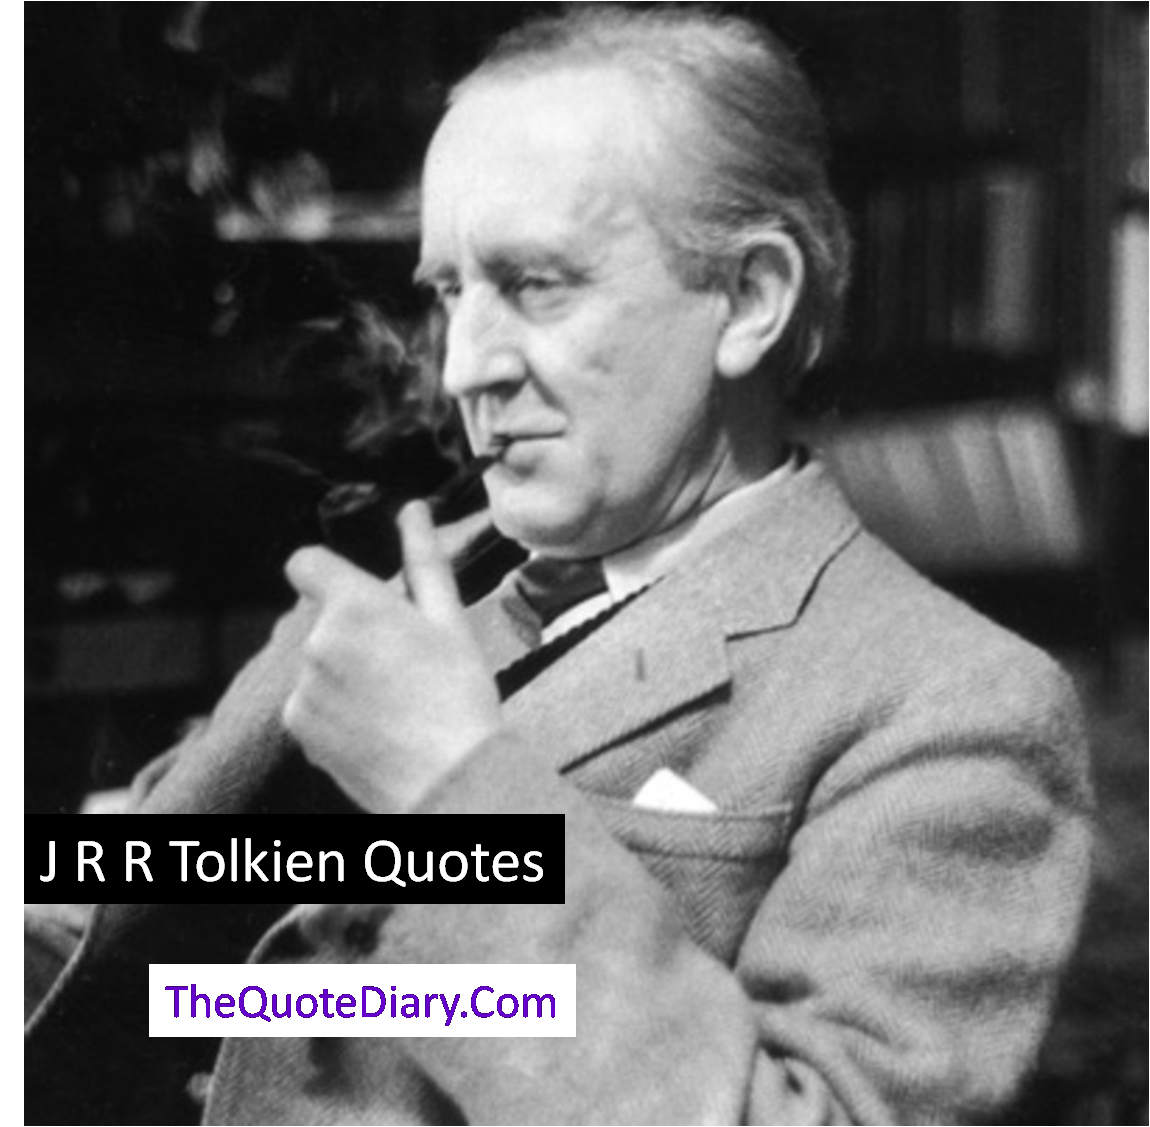 J R R Tolkien Quotes. J R R Tolkien was born on 3 January… | by The ...